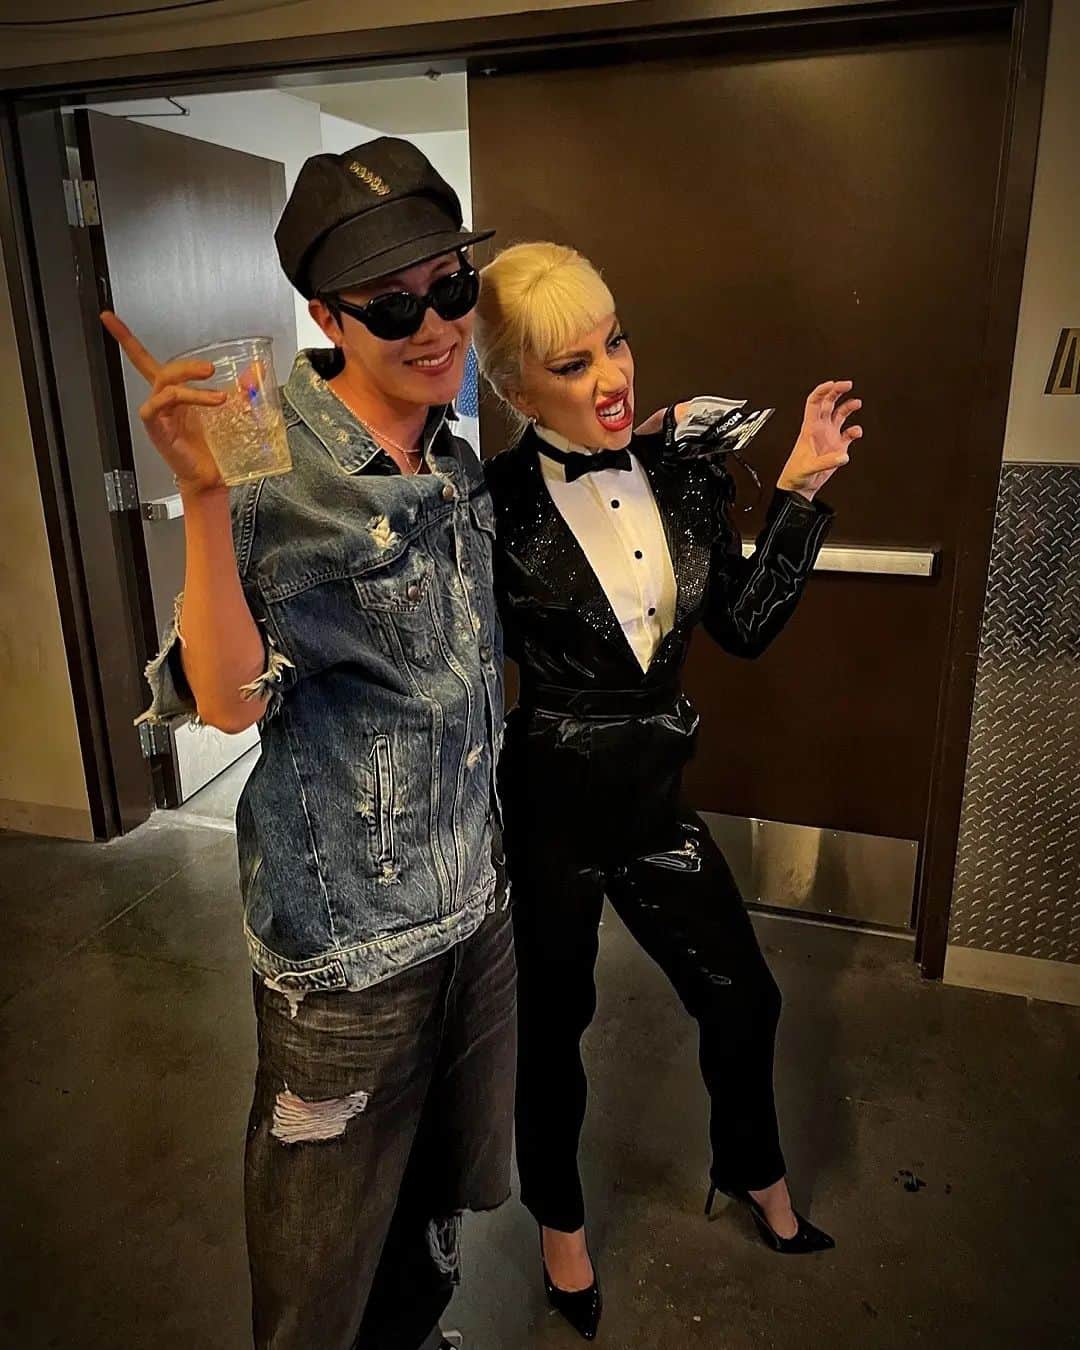 J-HOPEのインスタグラム：「Today was a really glorious day. When it comes to a show, there’s none like Lady Gaga!!! It was a special day for me, since I wanted to see her performance so much. Today, on the stage she was incredible, but off the stage she was so professional and there was so much to learn from her, and every comment from her for me will stay with me for my whole life. @ladygaga , my queen forever!!! Please keep making your incredible music. Thanks to you, today I discovered the beauty of jazz!!! I cheer you on as a fan!!! Love U!!  오늘 정말 영광스러운 날입니다. Show 하면 레이디 가가!!!, 그녀의 공연을 너무 보고 싶었던 나로서 정말 특별한 날입니다. 오늘, 무대도 무대지만  무대 밑에서의 그녀의 모습은 너무 프로페셔널하고 배울 점이 많았고, 저를 위한 그녀의 멘트 하나하나는 평생 기억에 남을 거 같습니다.  영원한 나의 퀸 @ladygaga !!! 앞으로도 멋진 음악 보여주세요..  당신 덕분에 오늘 재즈의 매력을 알았습니다!!! 팬으로서 응원합니다!!! Love U..!!」